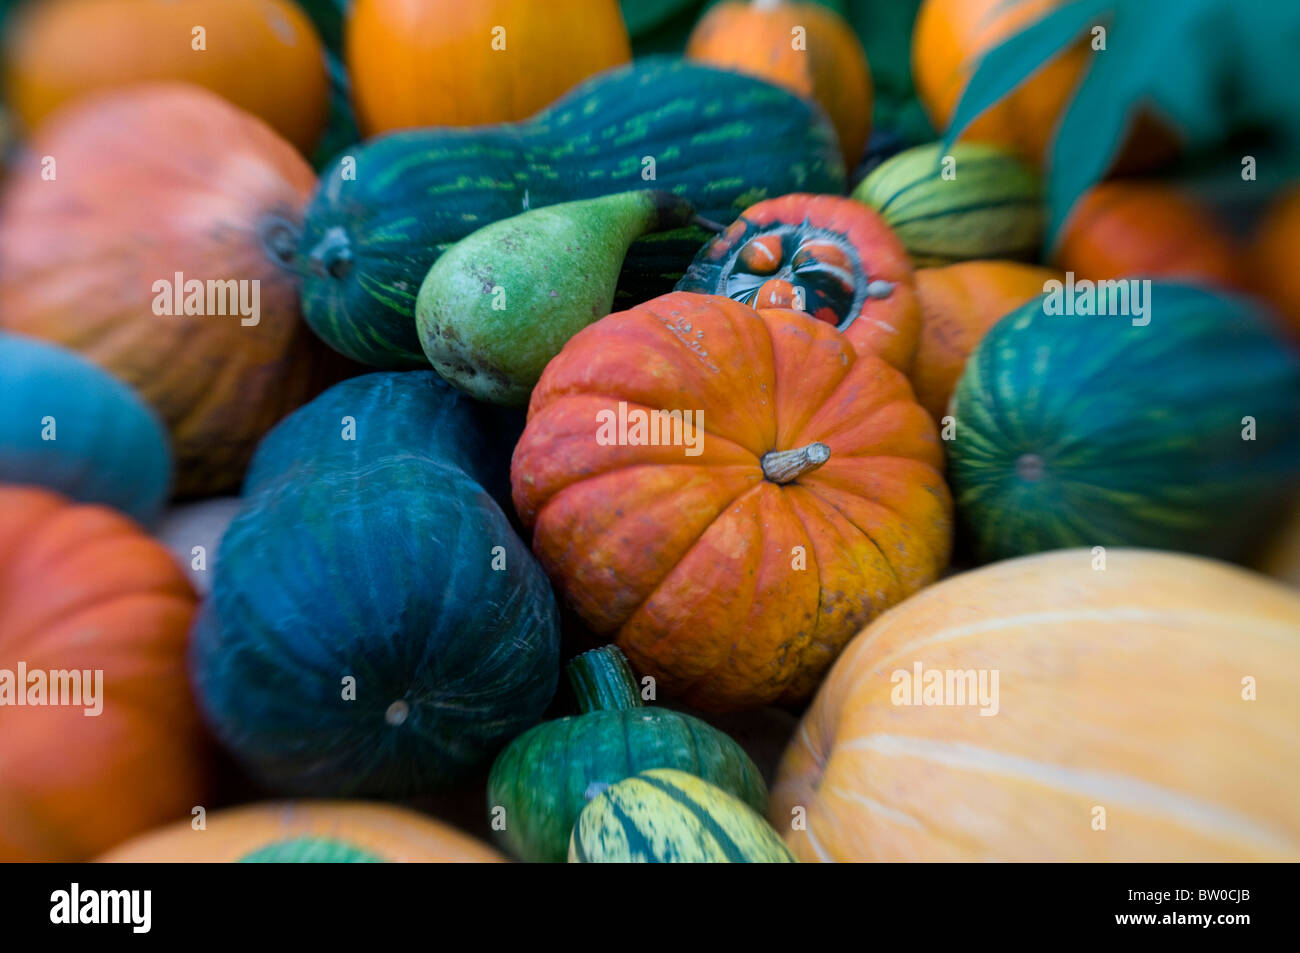 A collection of winter pumpkins, Gourds and Squashes Stock Photo